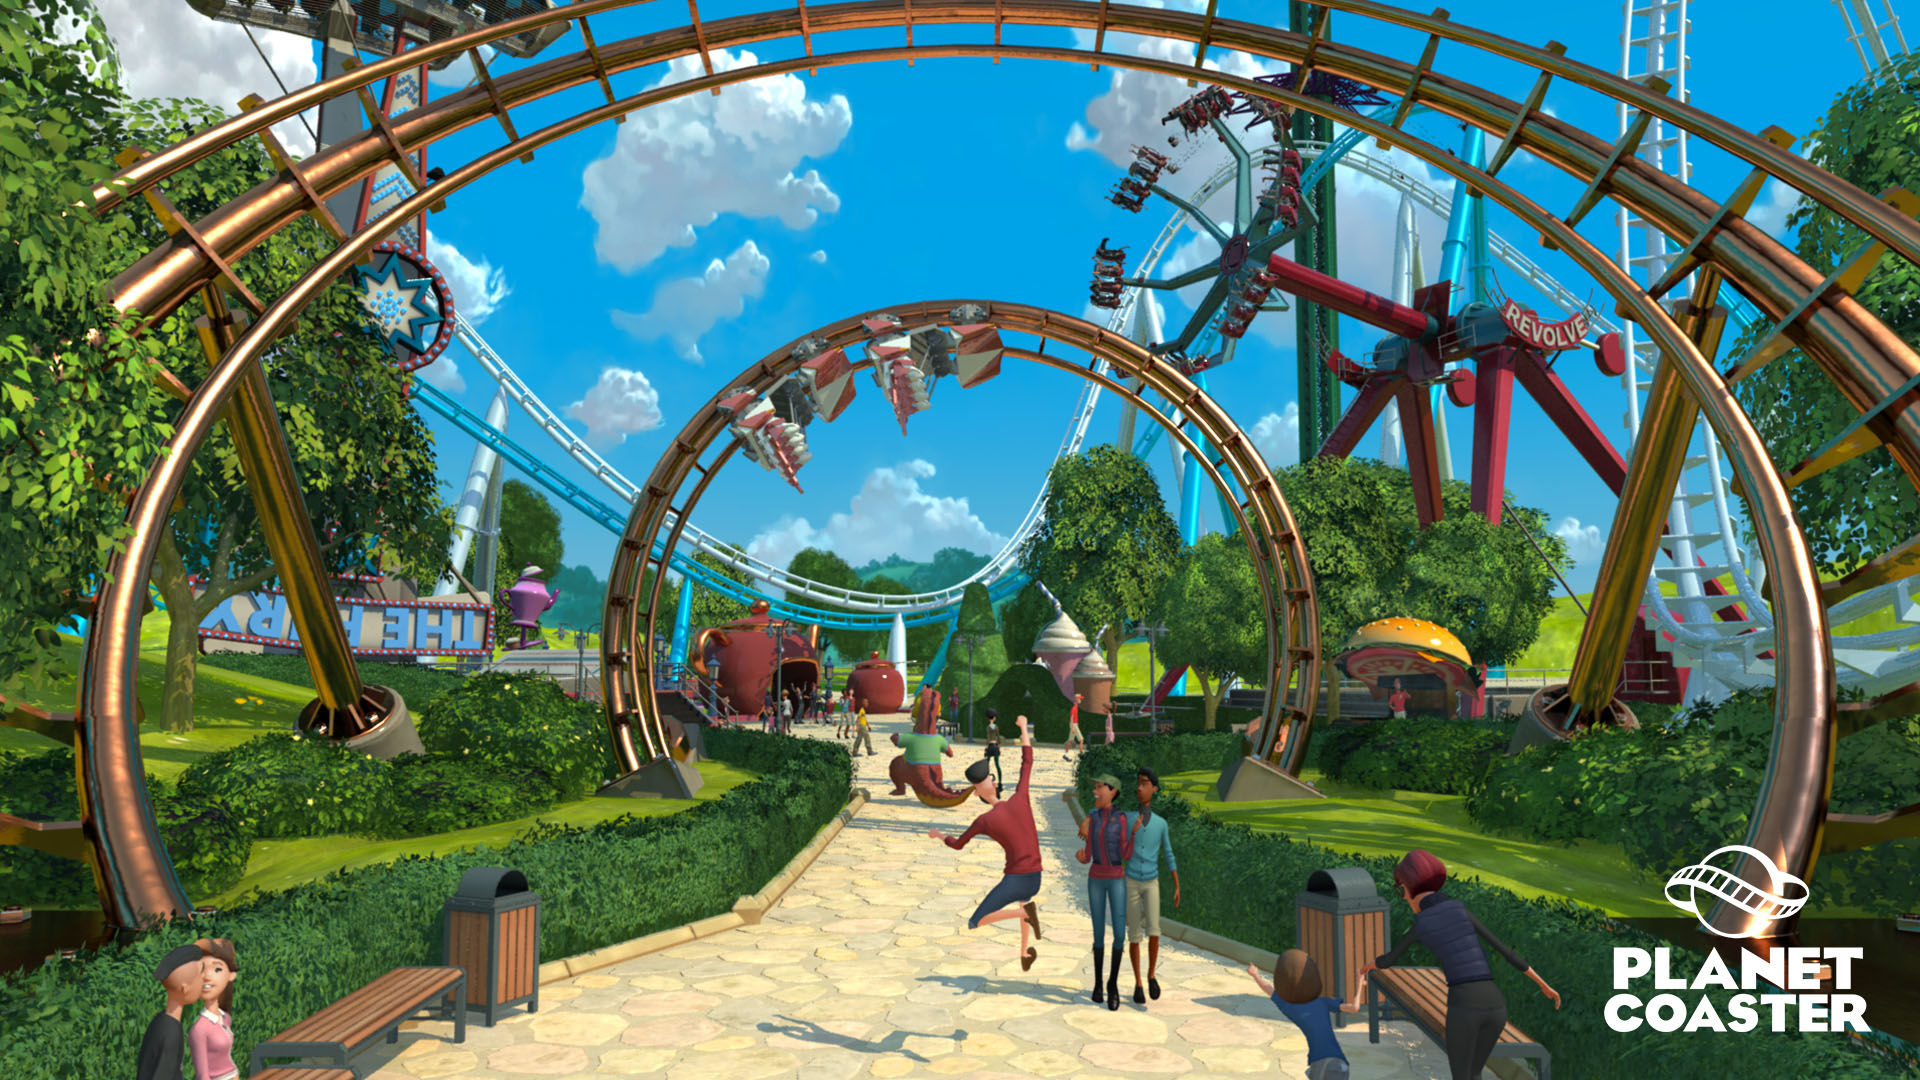 Planet Coaster Hd Wallpapers - Planet Coaster , HD Wallpaper & Backgrounds